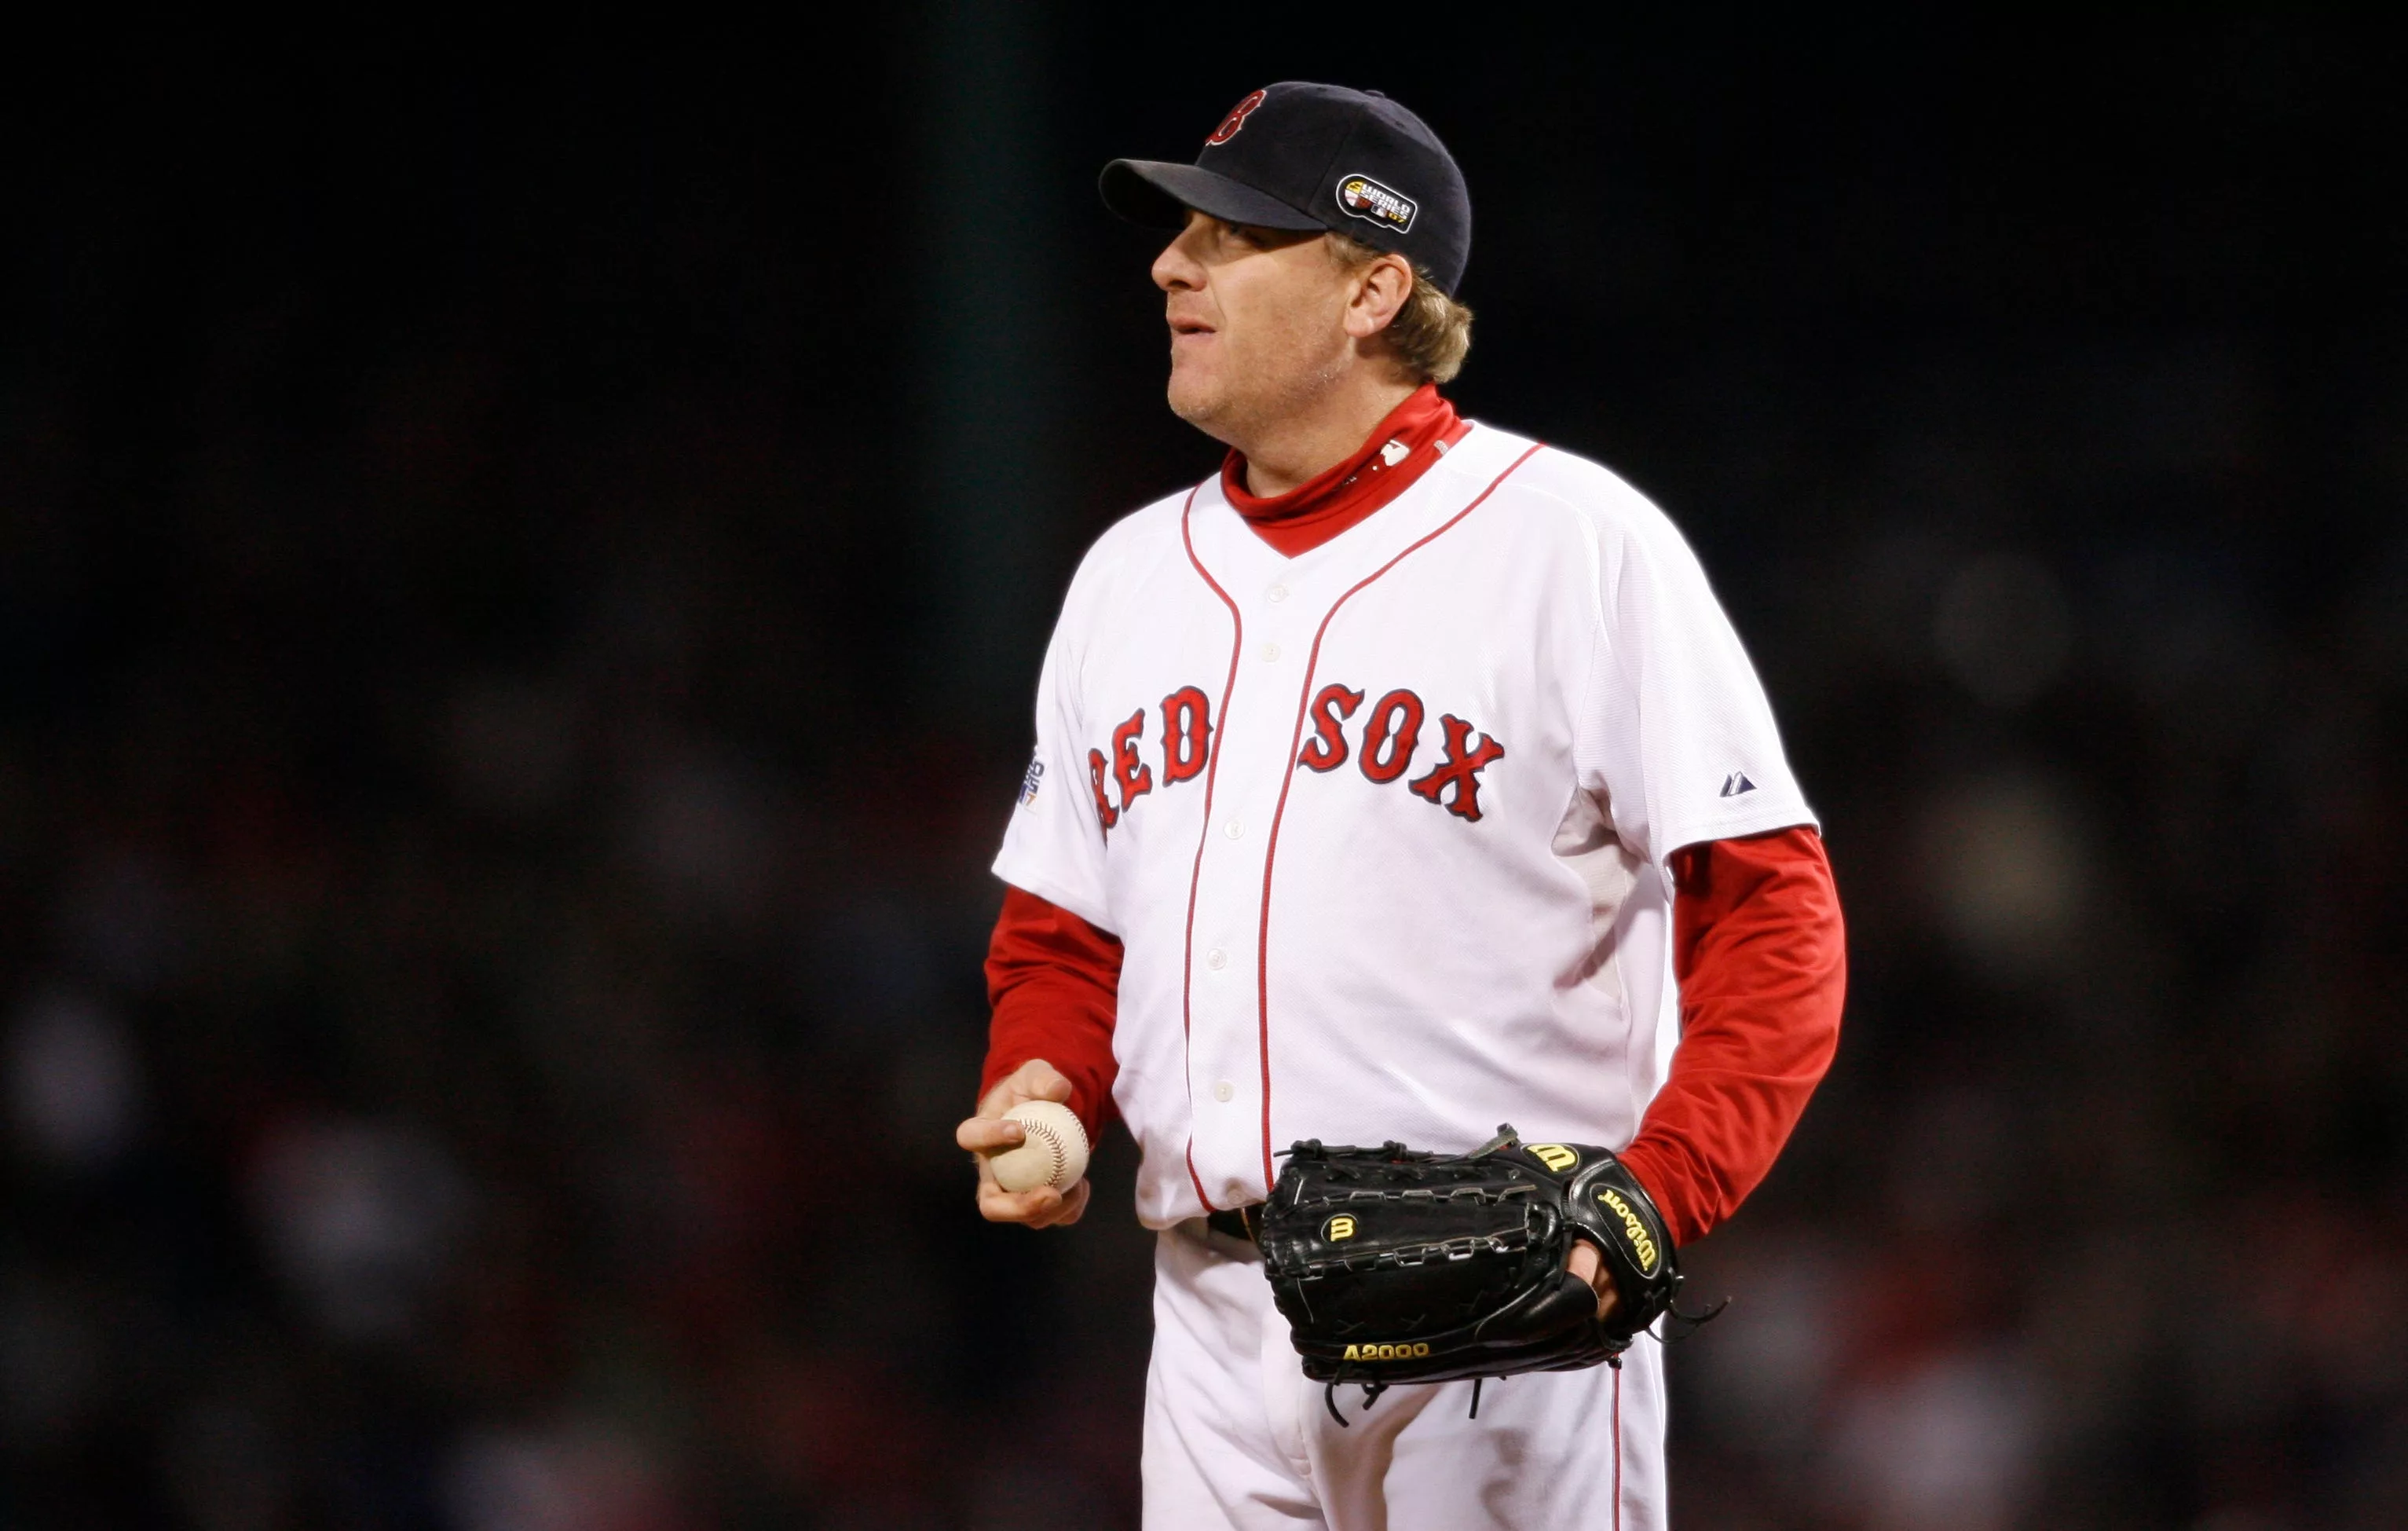 Tim Wakefield Asks for 'Privacy' After Curt Schilling Shares